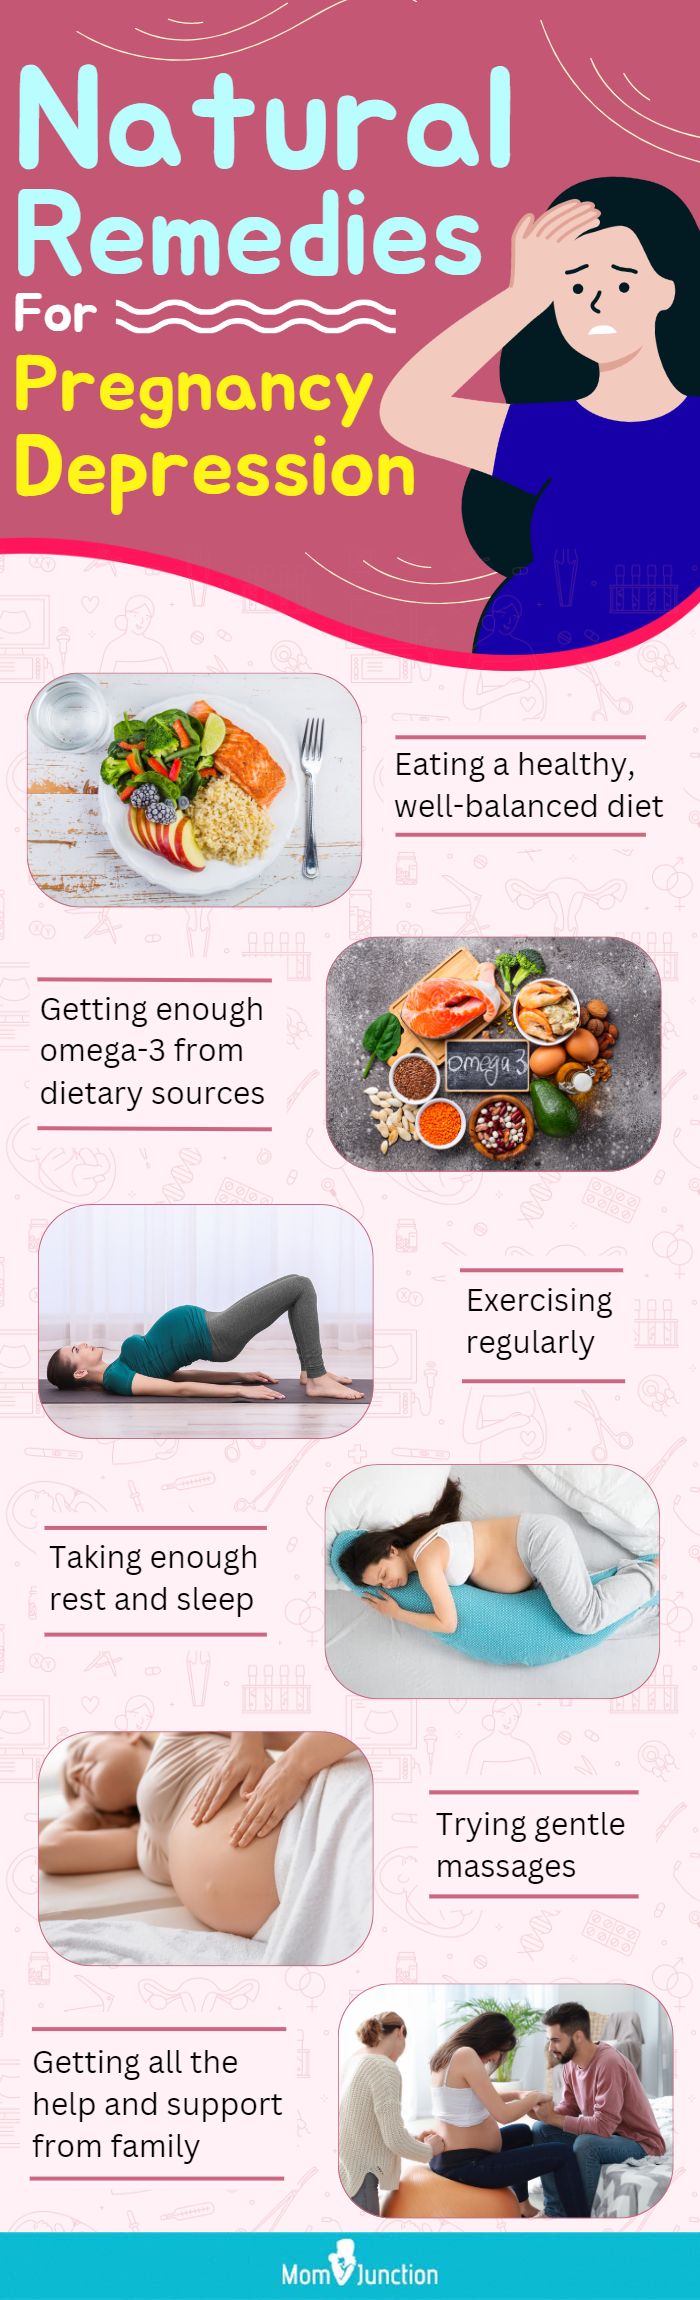 natural remedies for pregnancy depression (infographic)